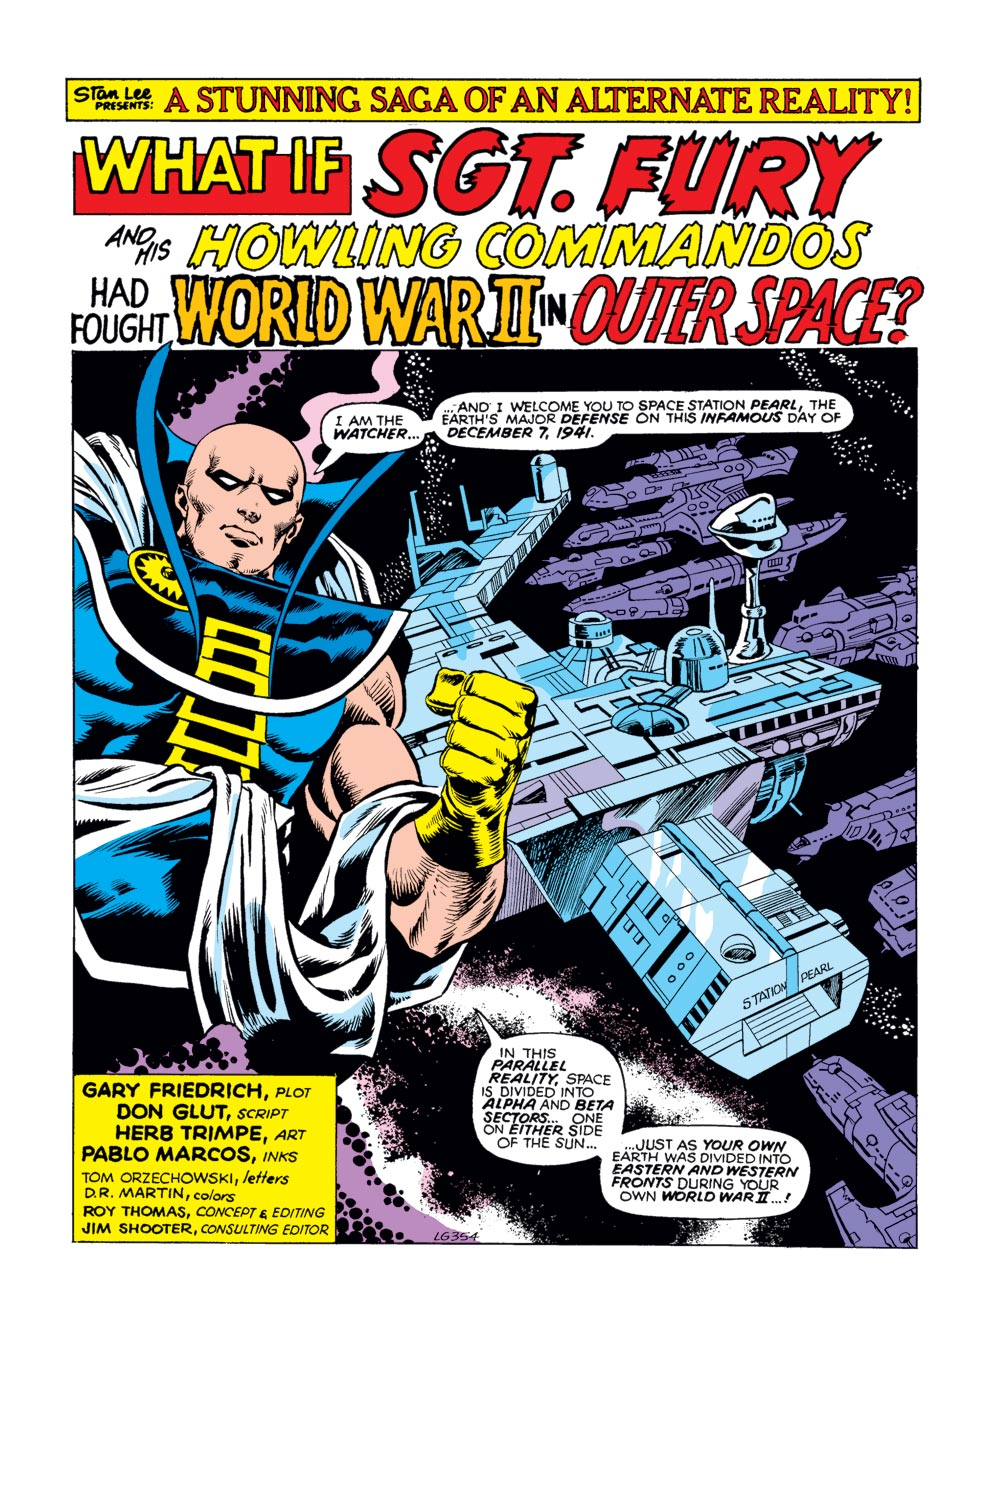 What If? (1977) issue 14 - Sgt. Fury had Fought WWII in Outer Space - Page 2